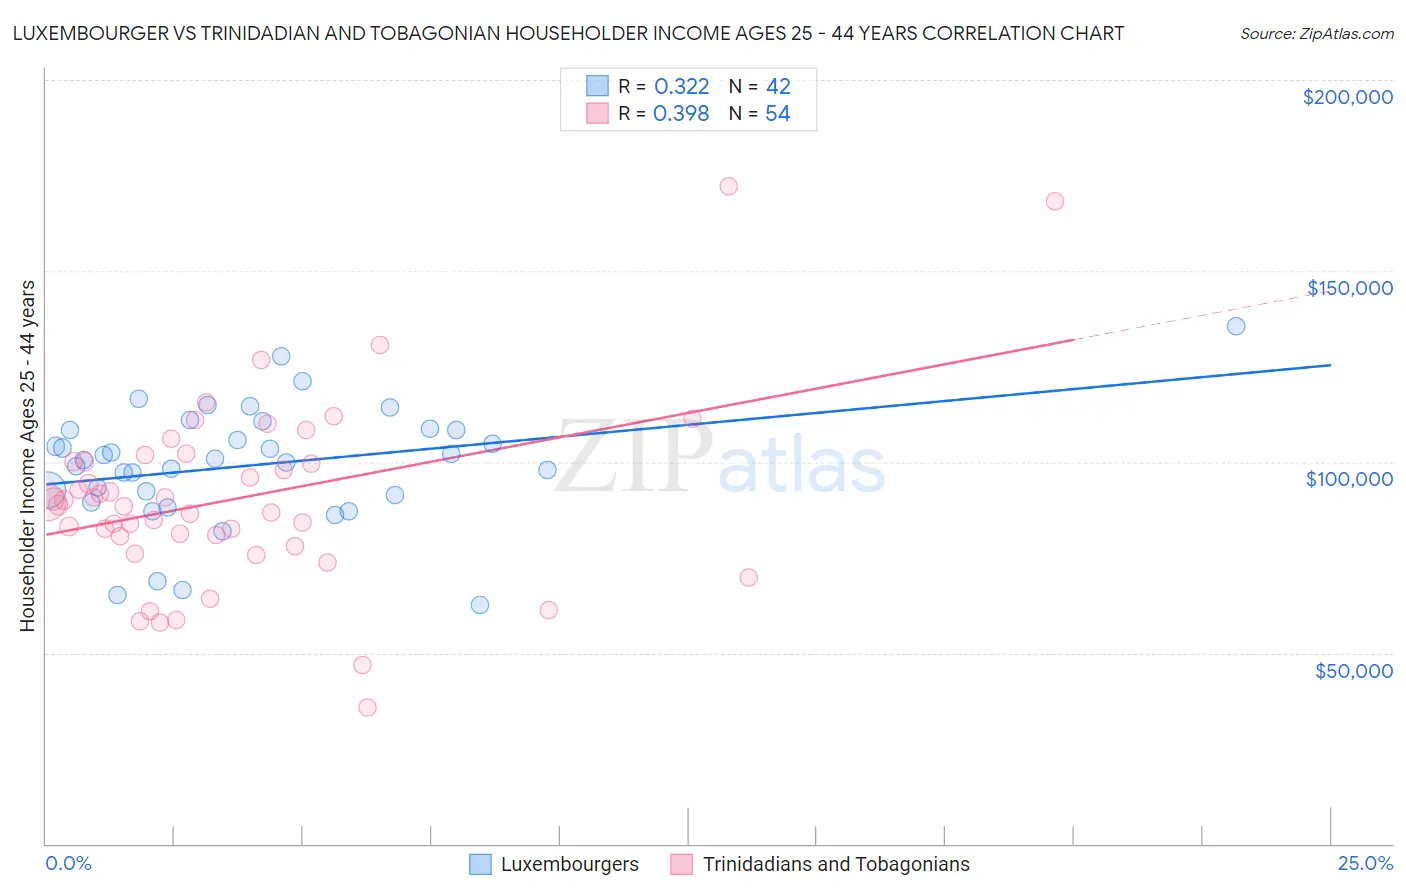 Luxembourger vs Trinidadian and Tobagonian Householder Income Ages 25 - 44 years